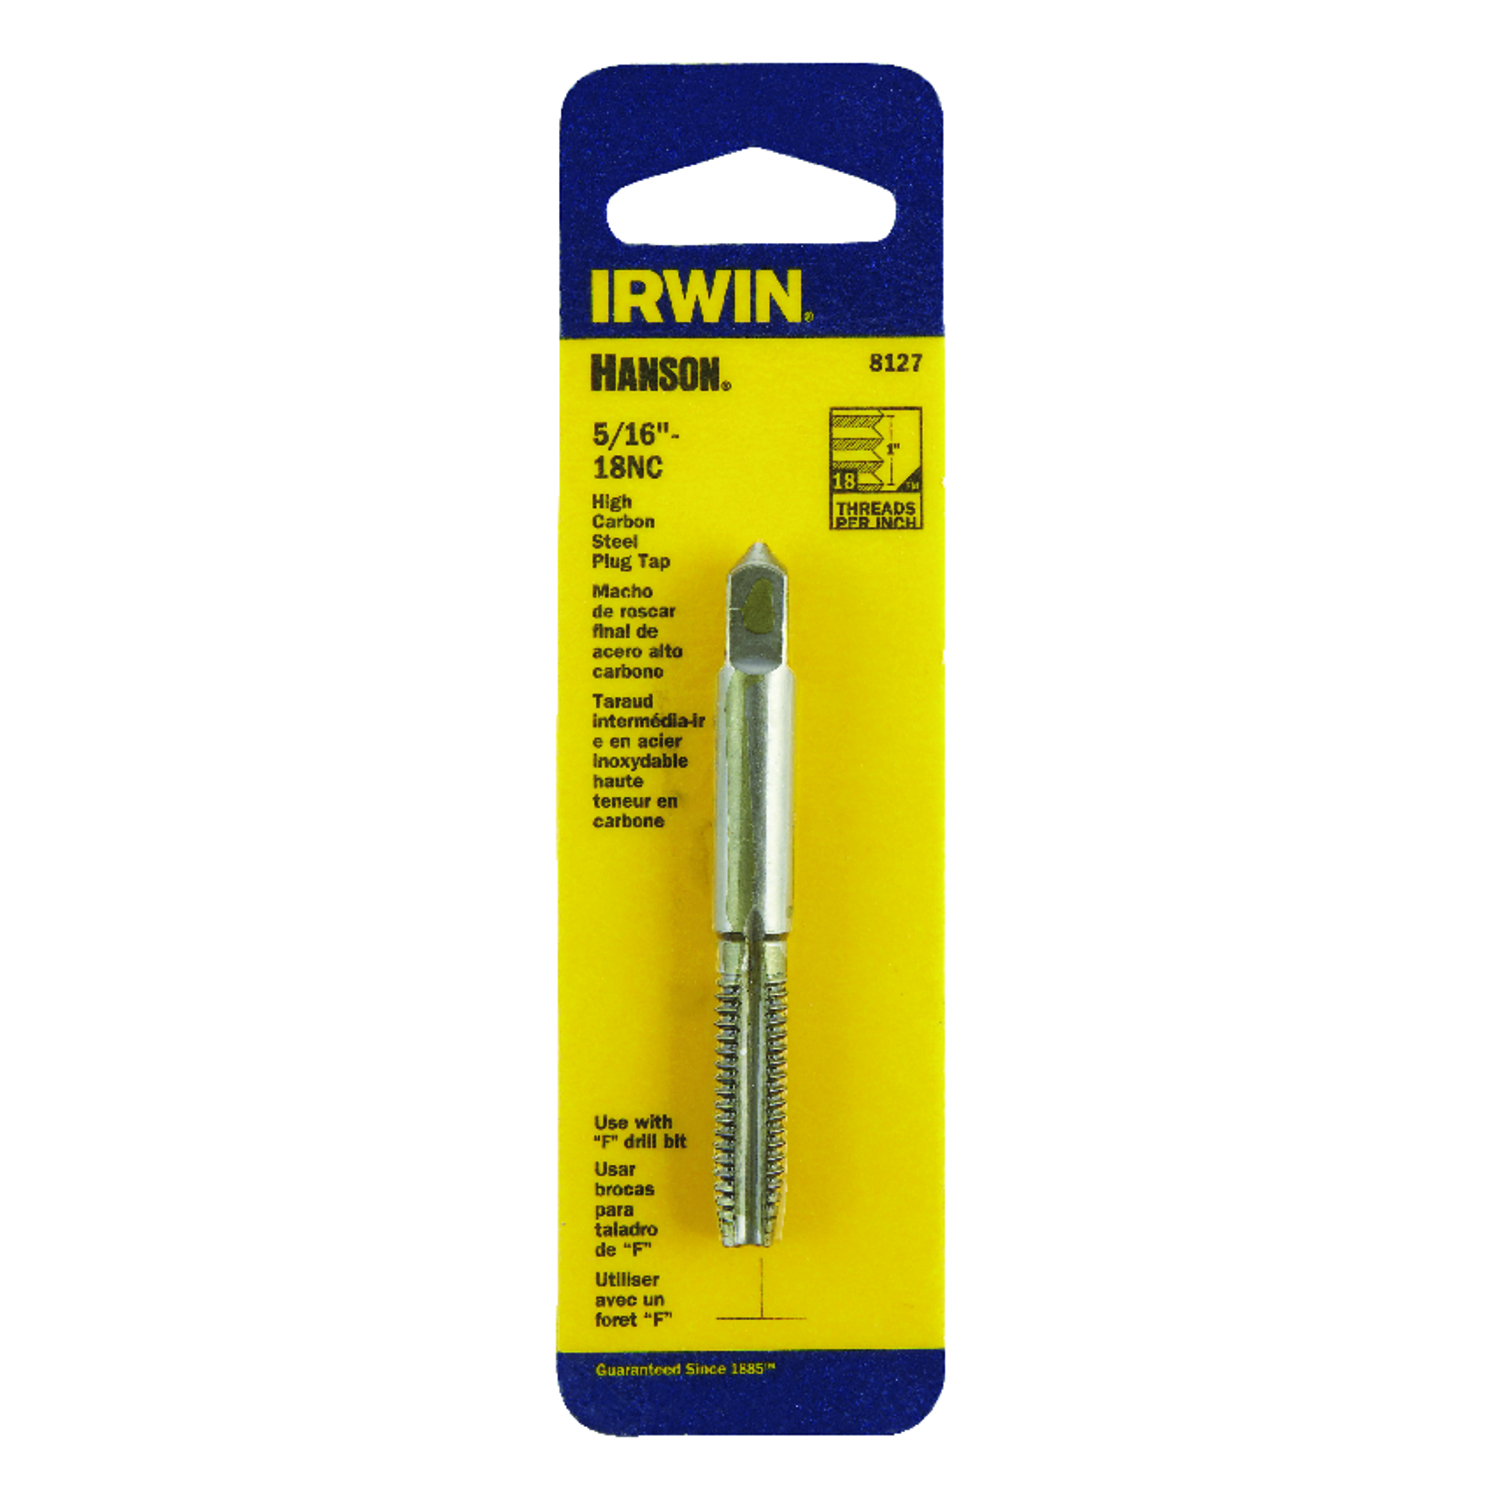 Irwin Hanson High Carbon Steel SAE Plug Tap Fraction Tap 5/16 in. 1 pc